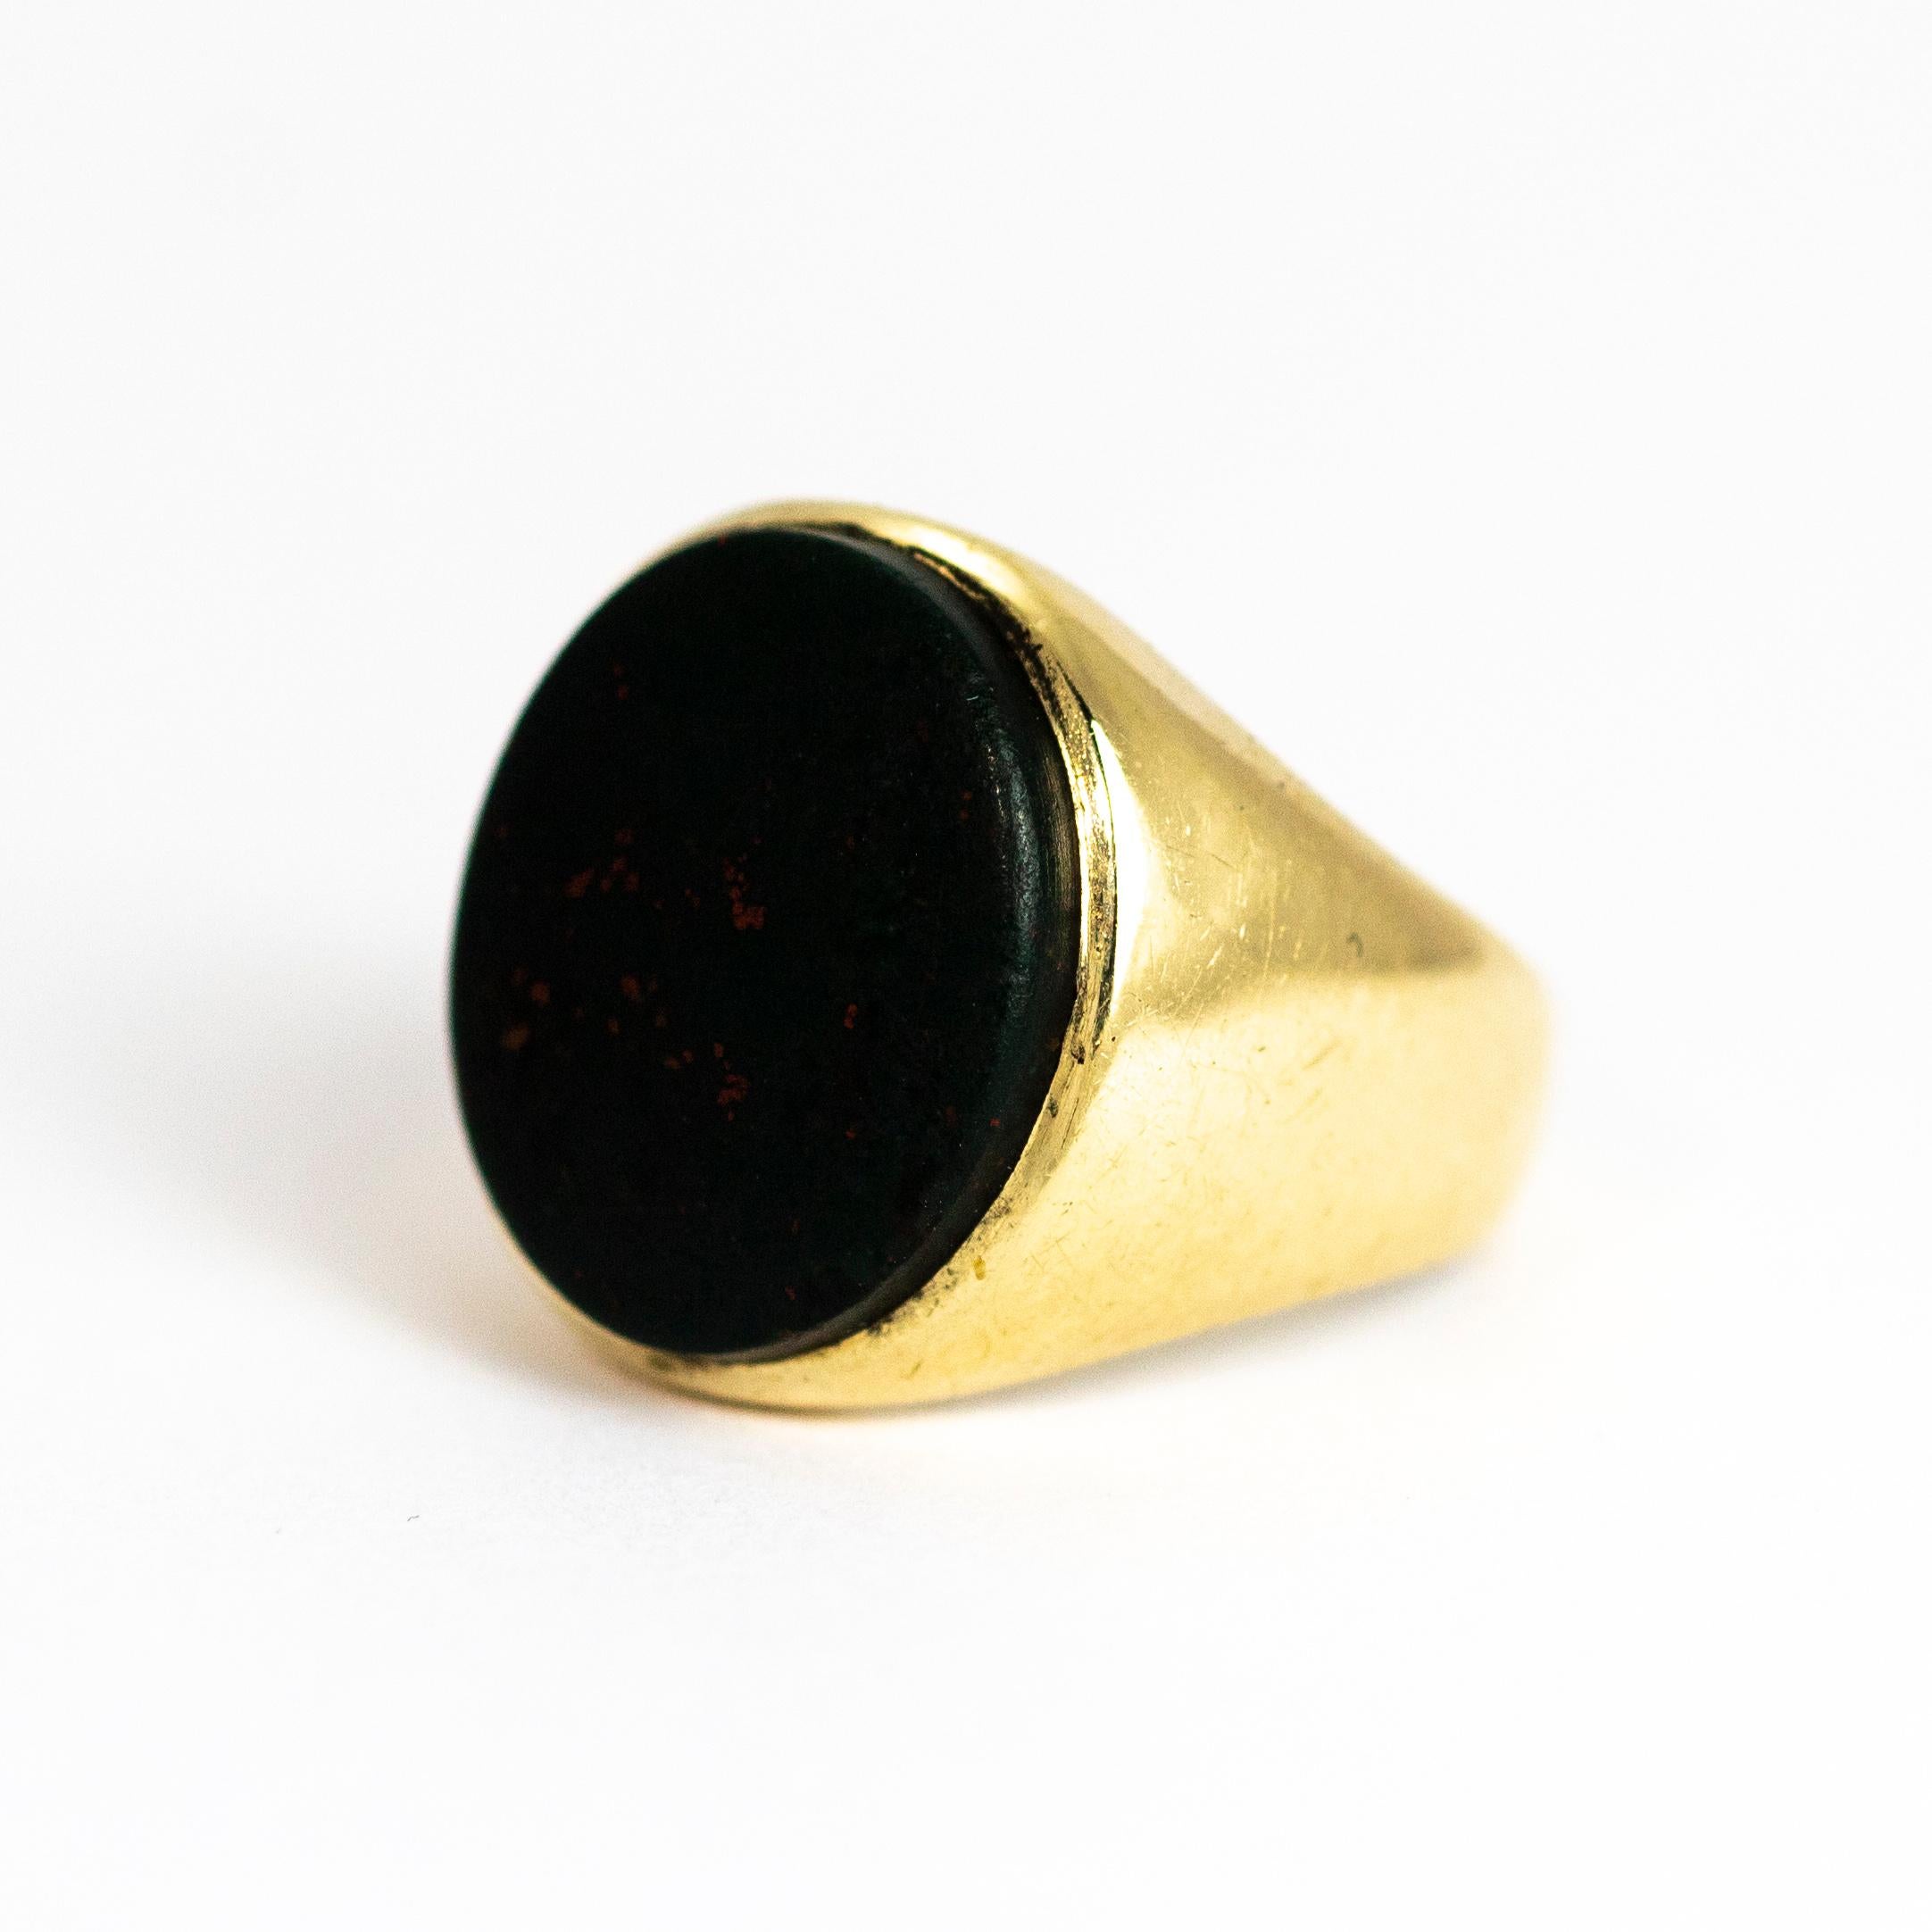 Beautiful Bloodstone set in a chunky 9ct gold ring. The great thing about bloodstone signet rings is that they are unisex!

Ring Size: G 1/2 or 3 1/2